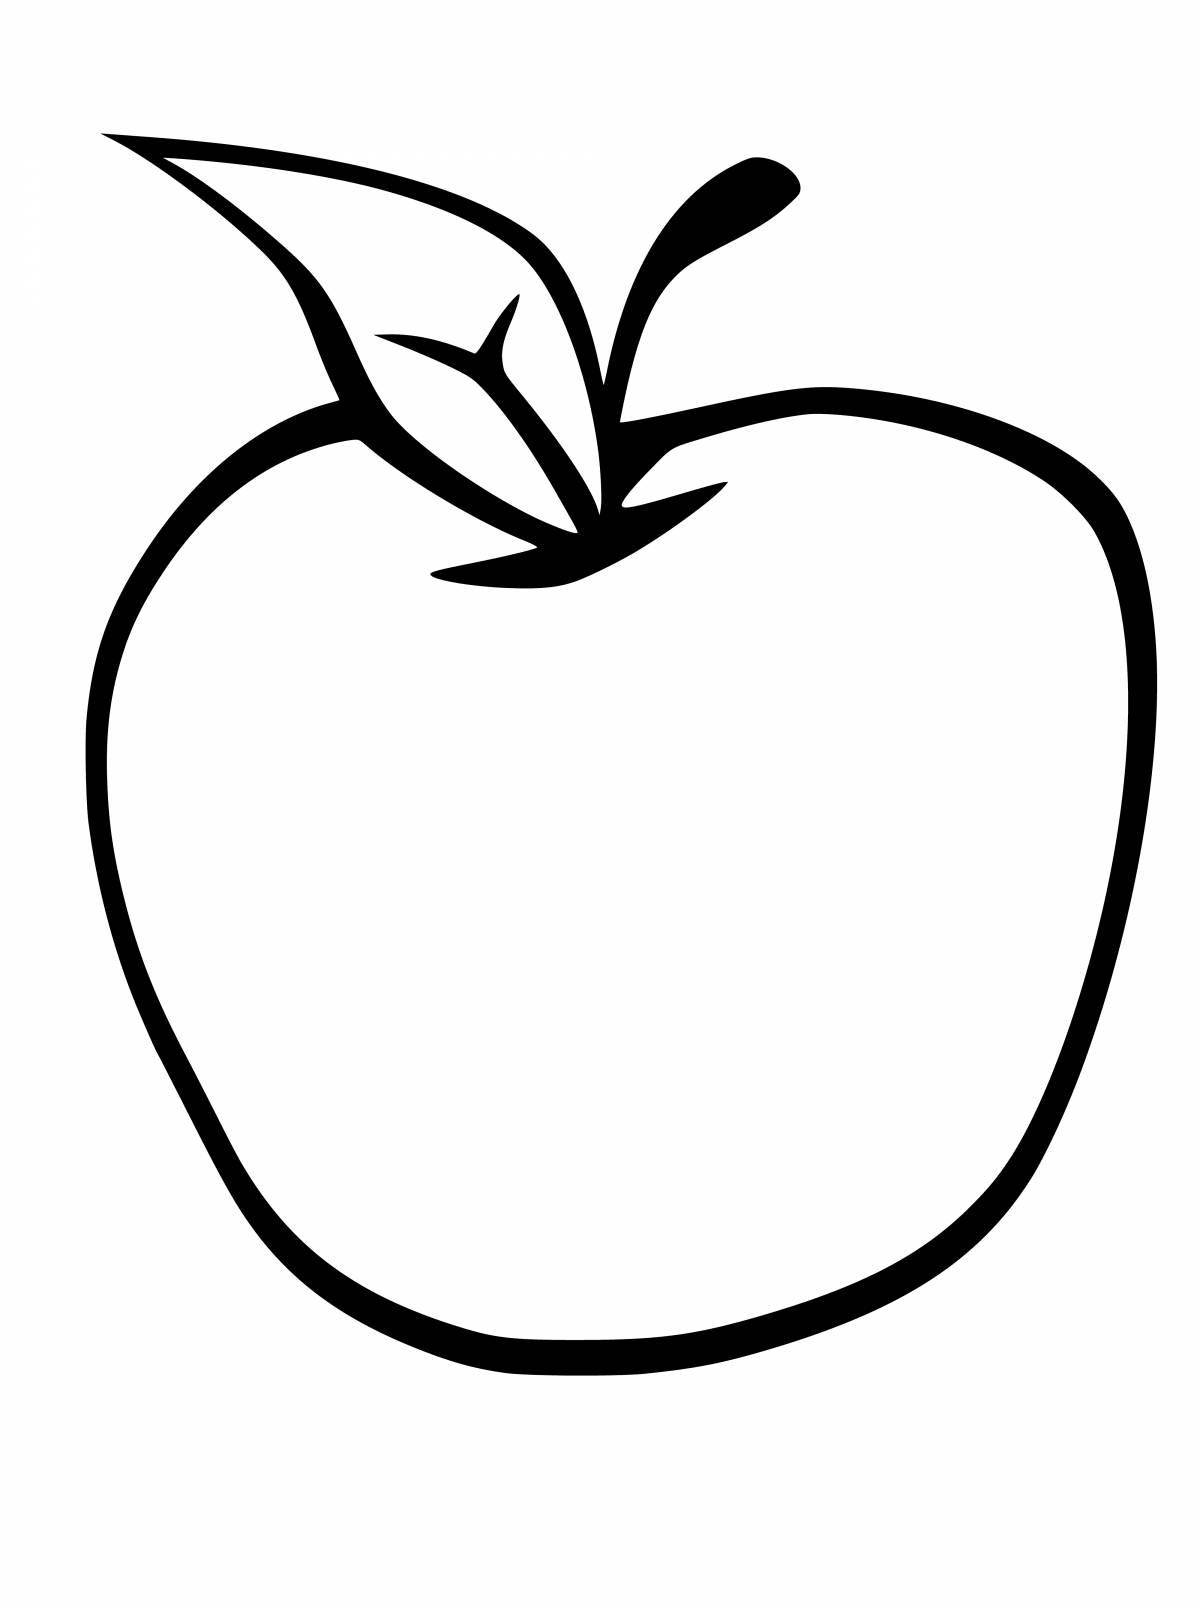 Amazing apple coloring book for kids